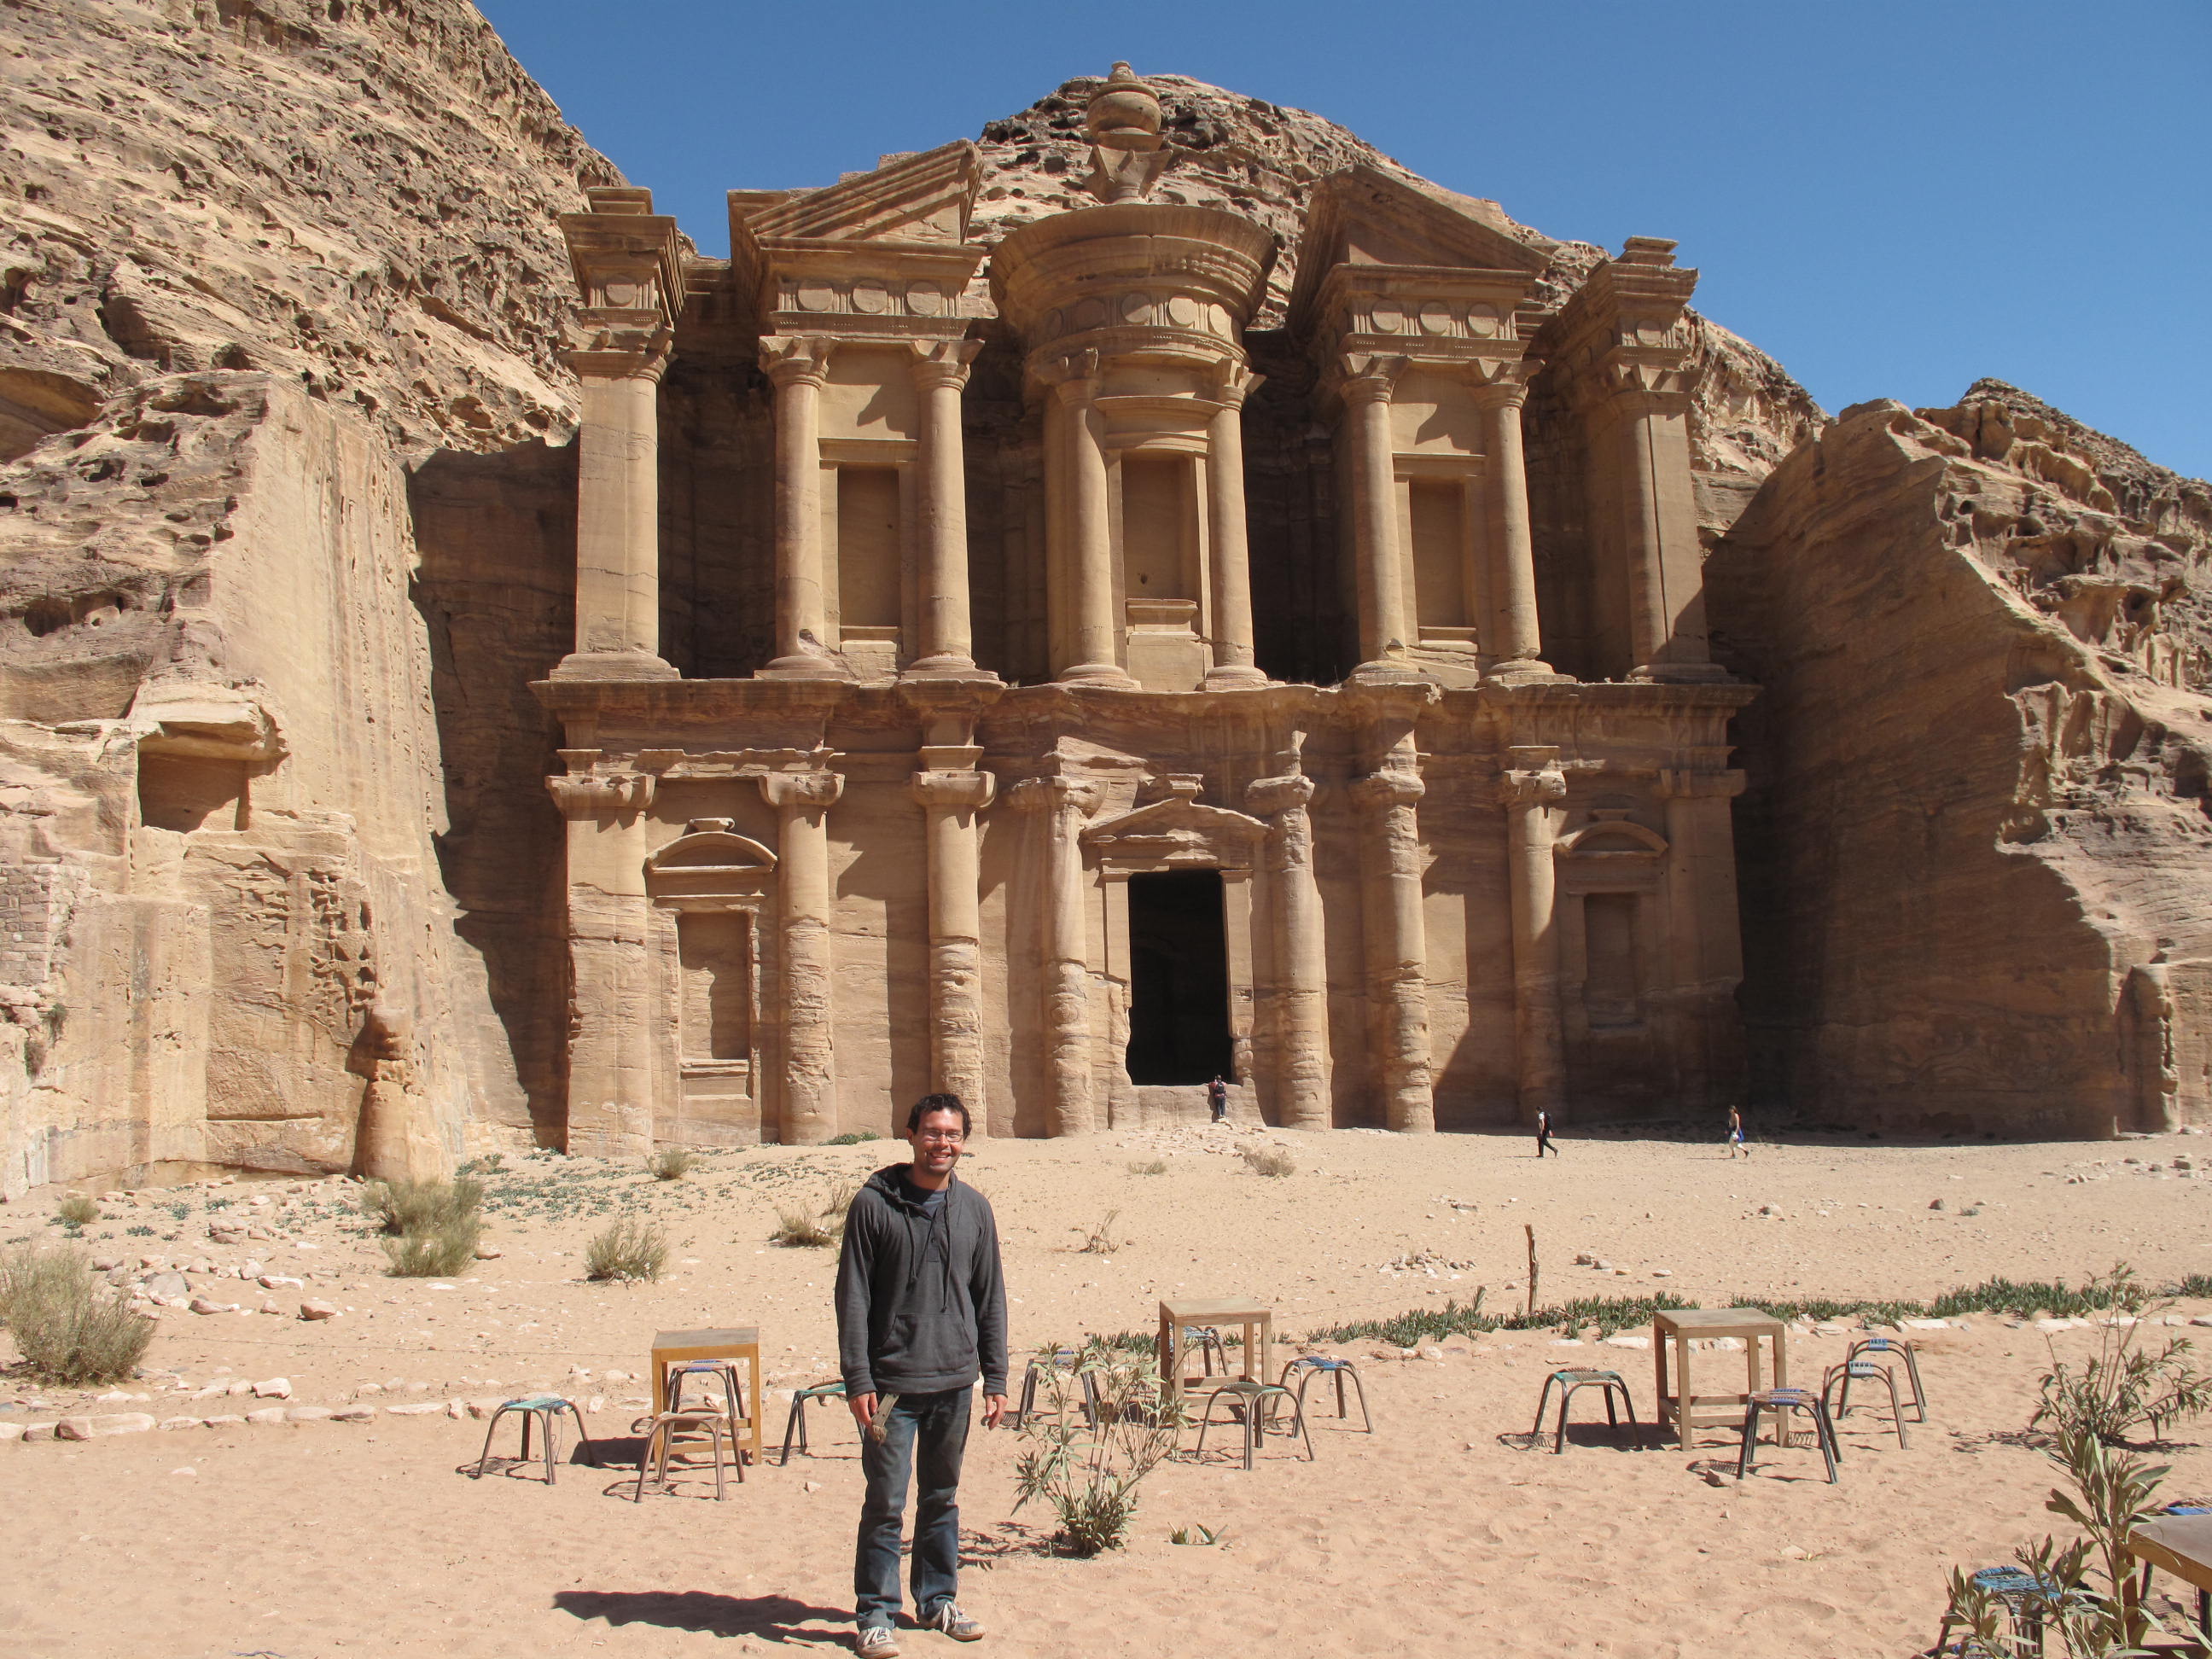 This is me at the Monastery in Petra.